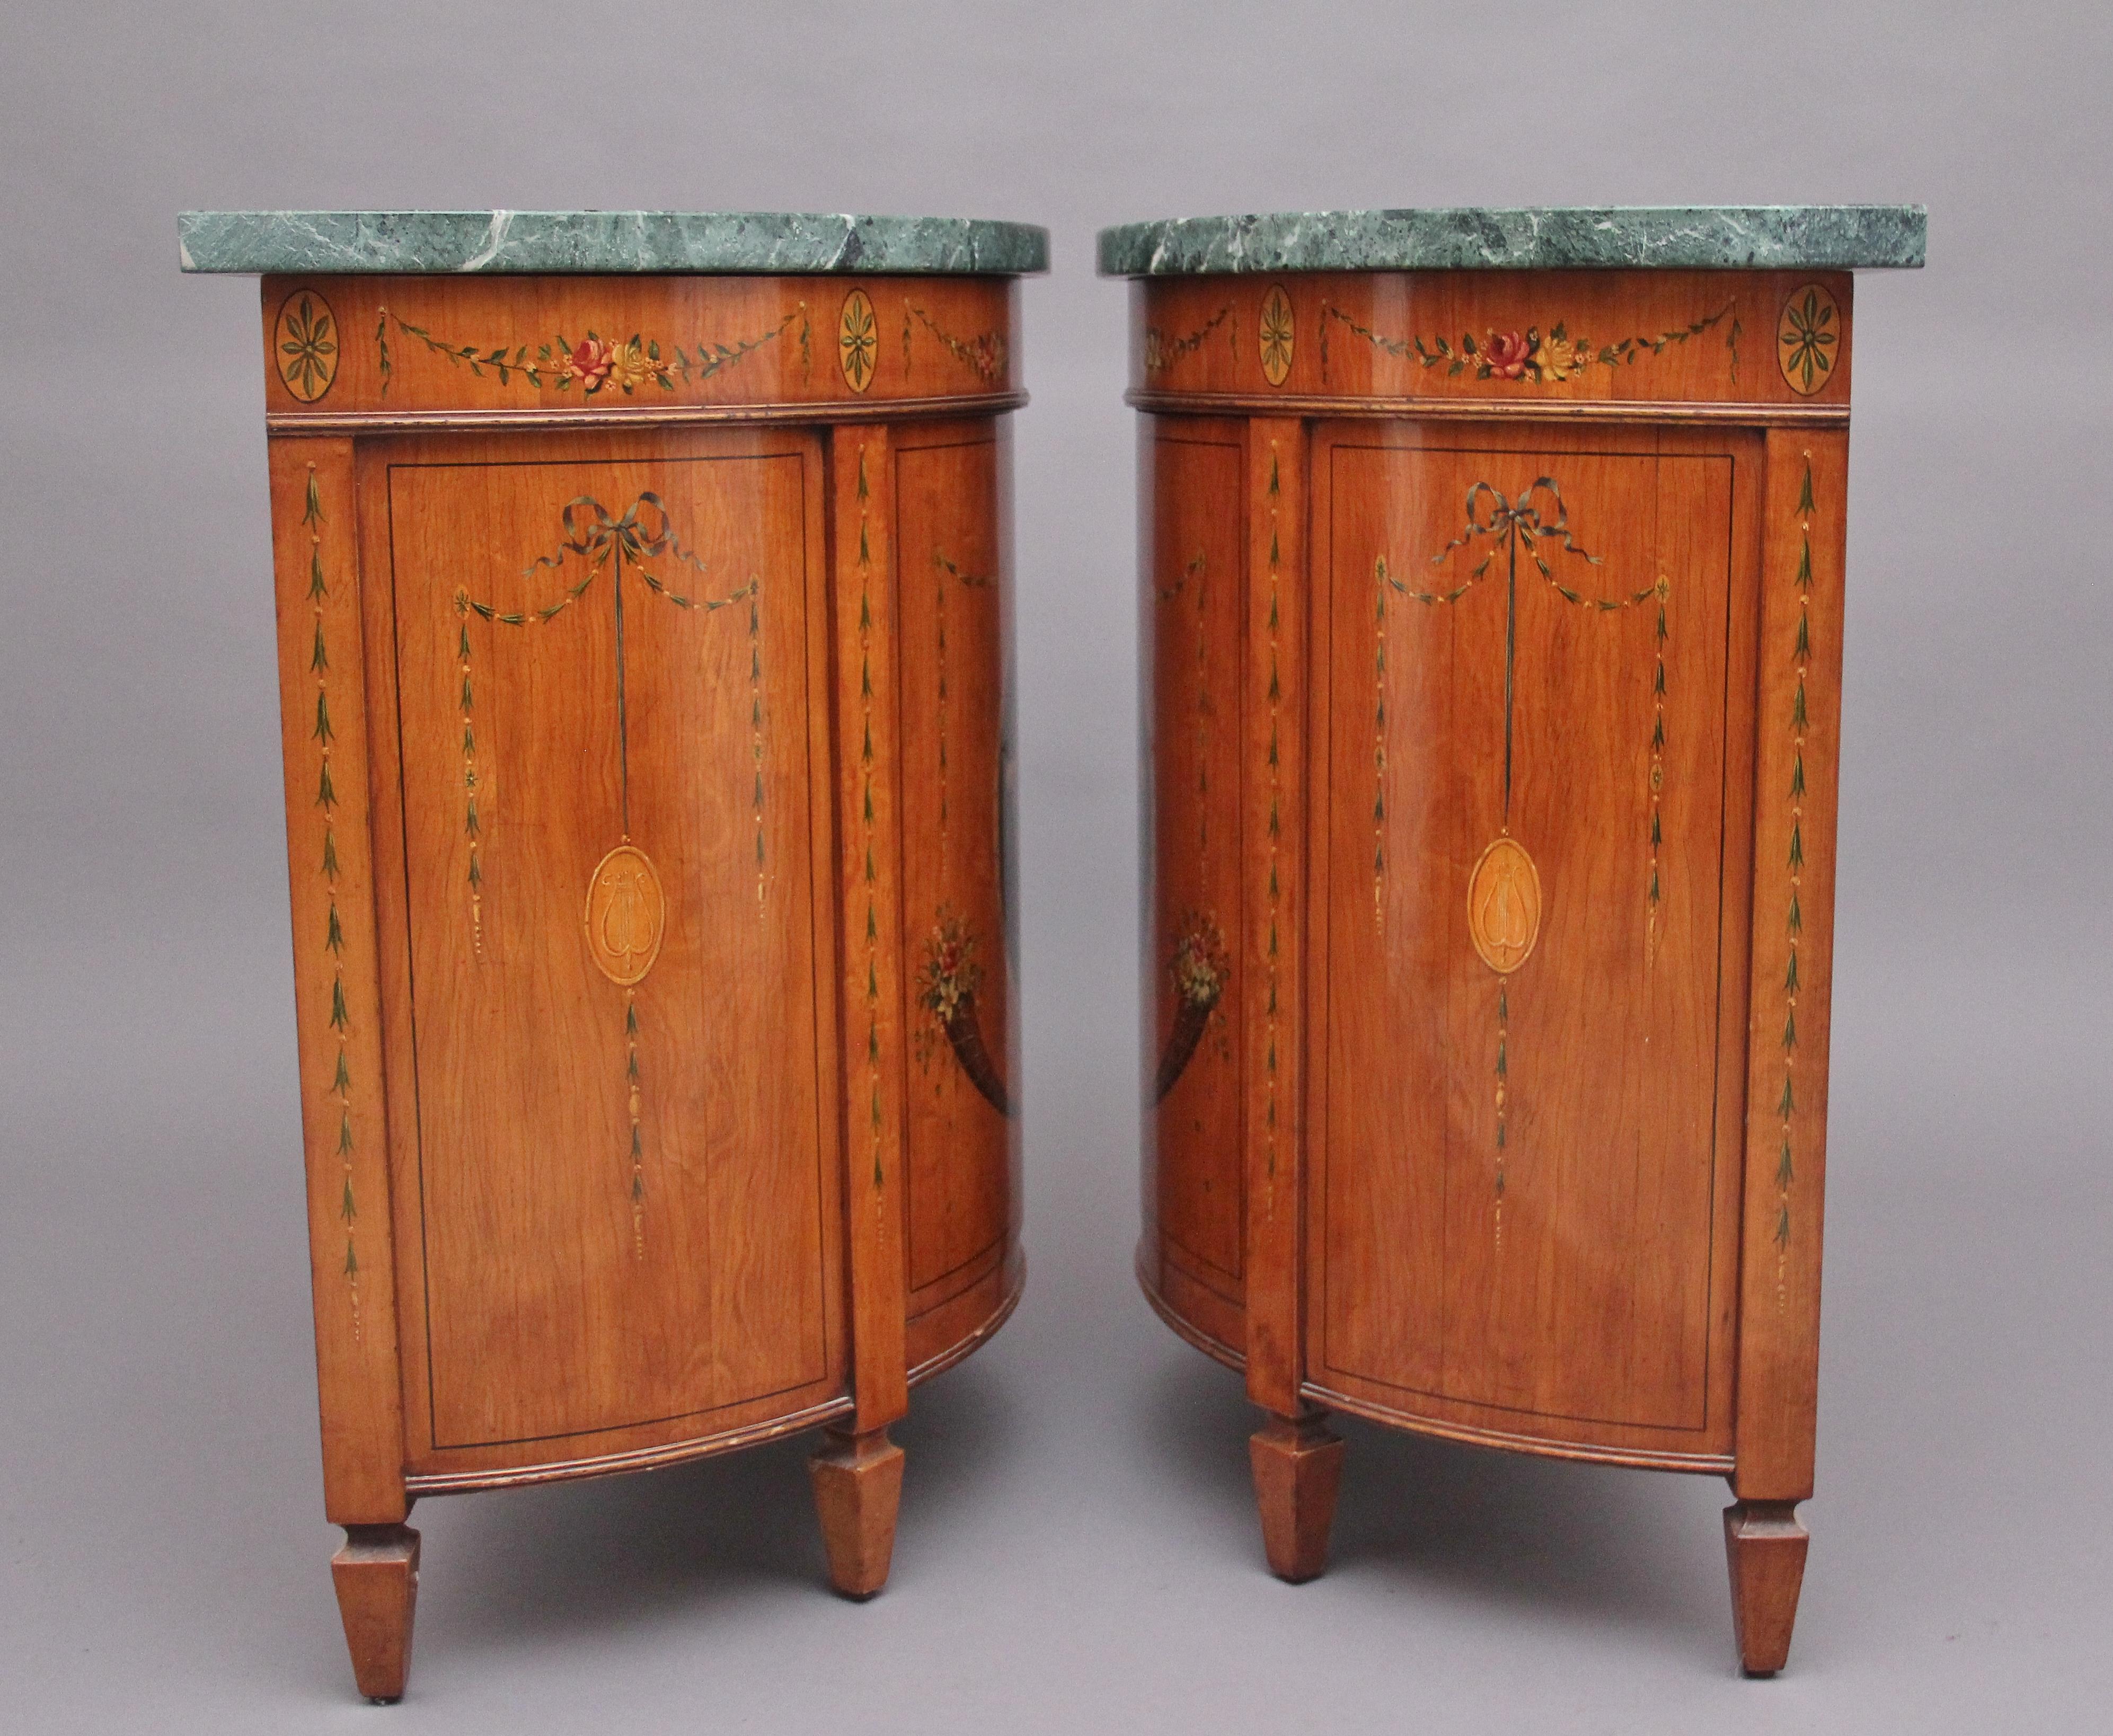 Pair of Early 20th Century Satinwood and Painted Demi Lune Cabinets For Sale 3